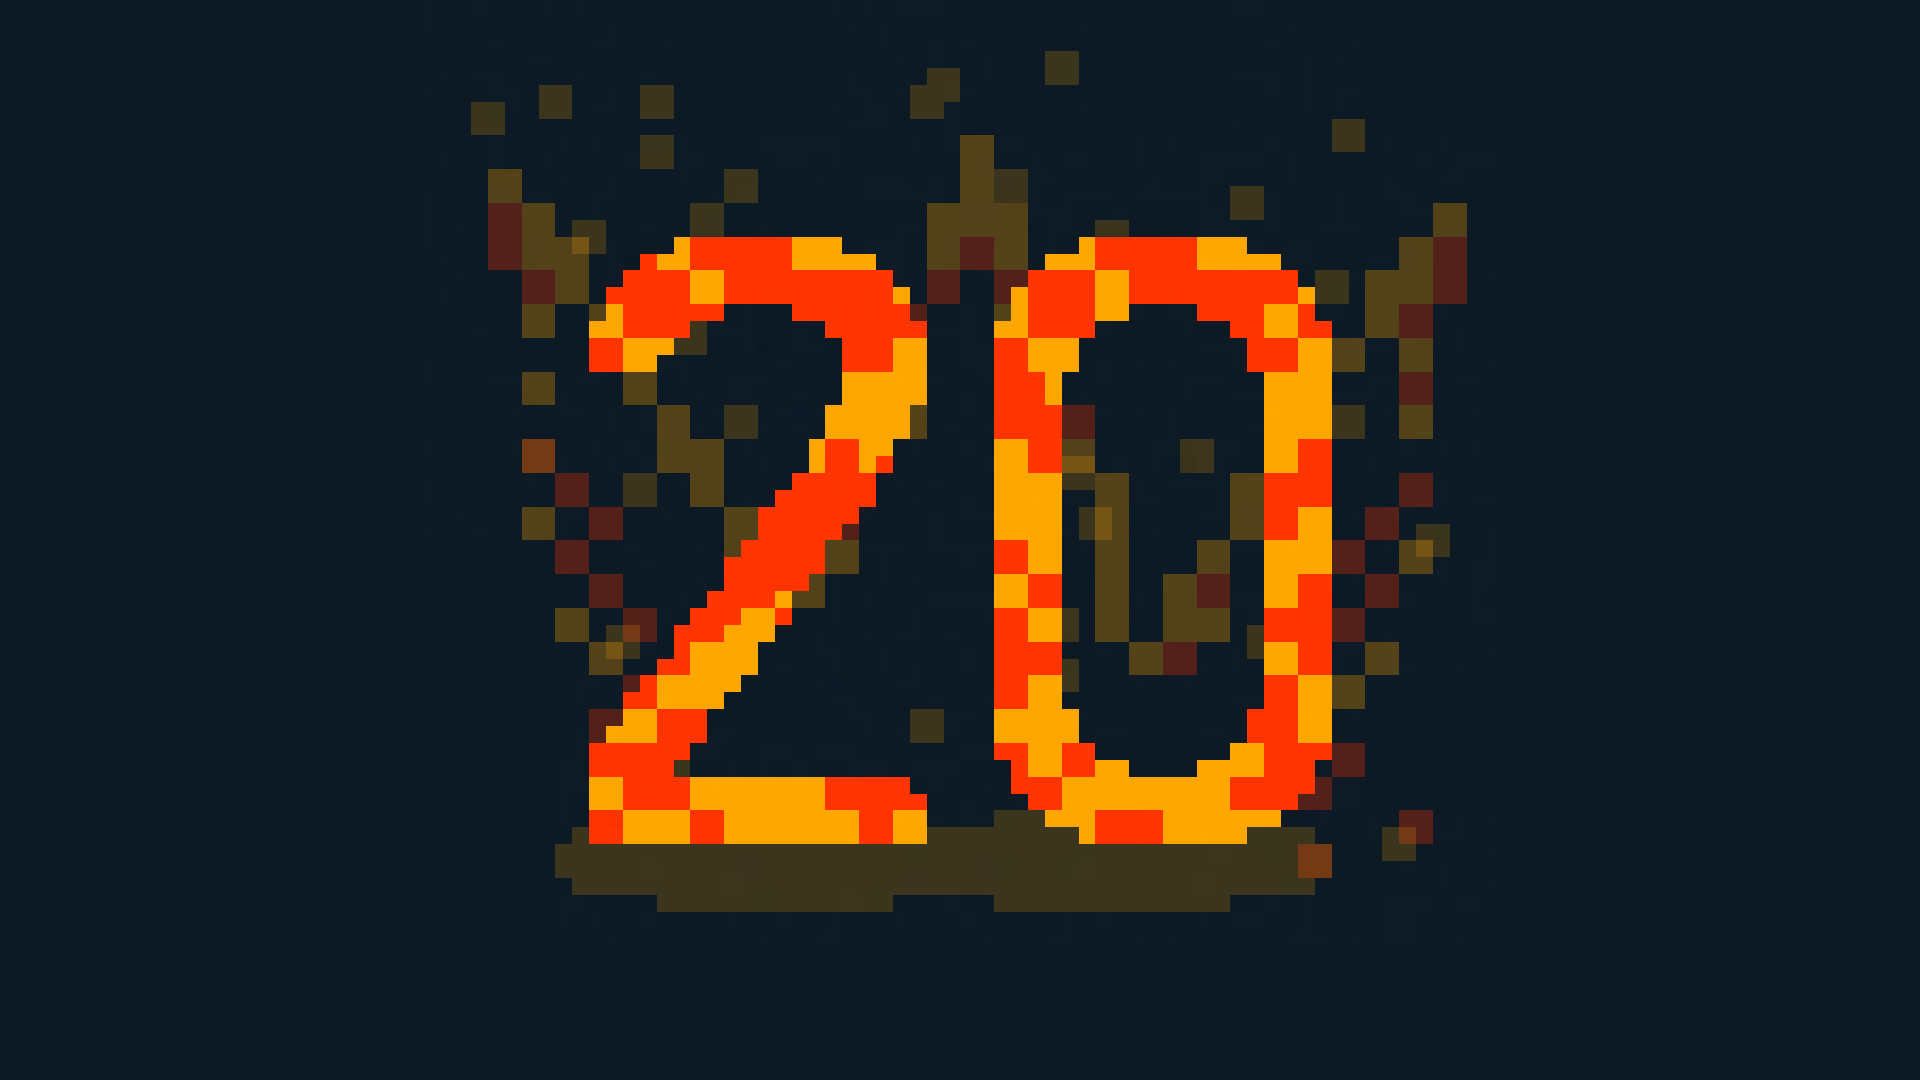 Icon for 20 levels